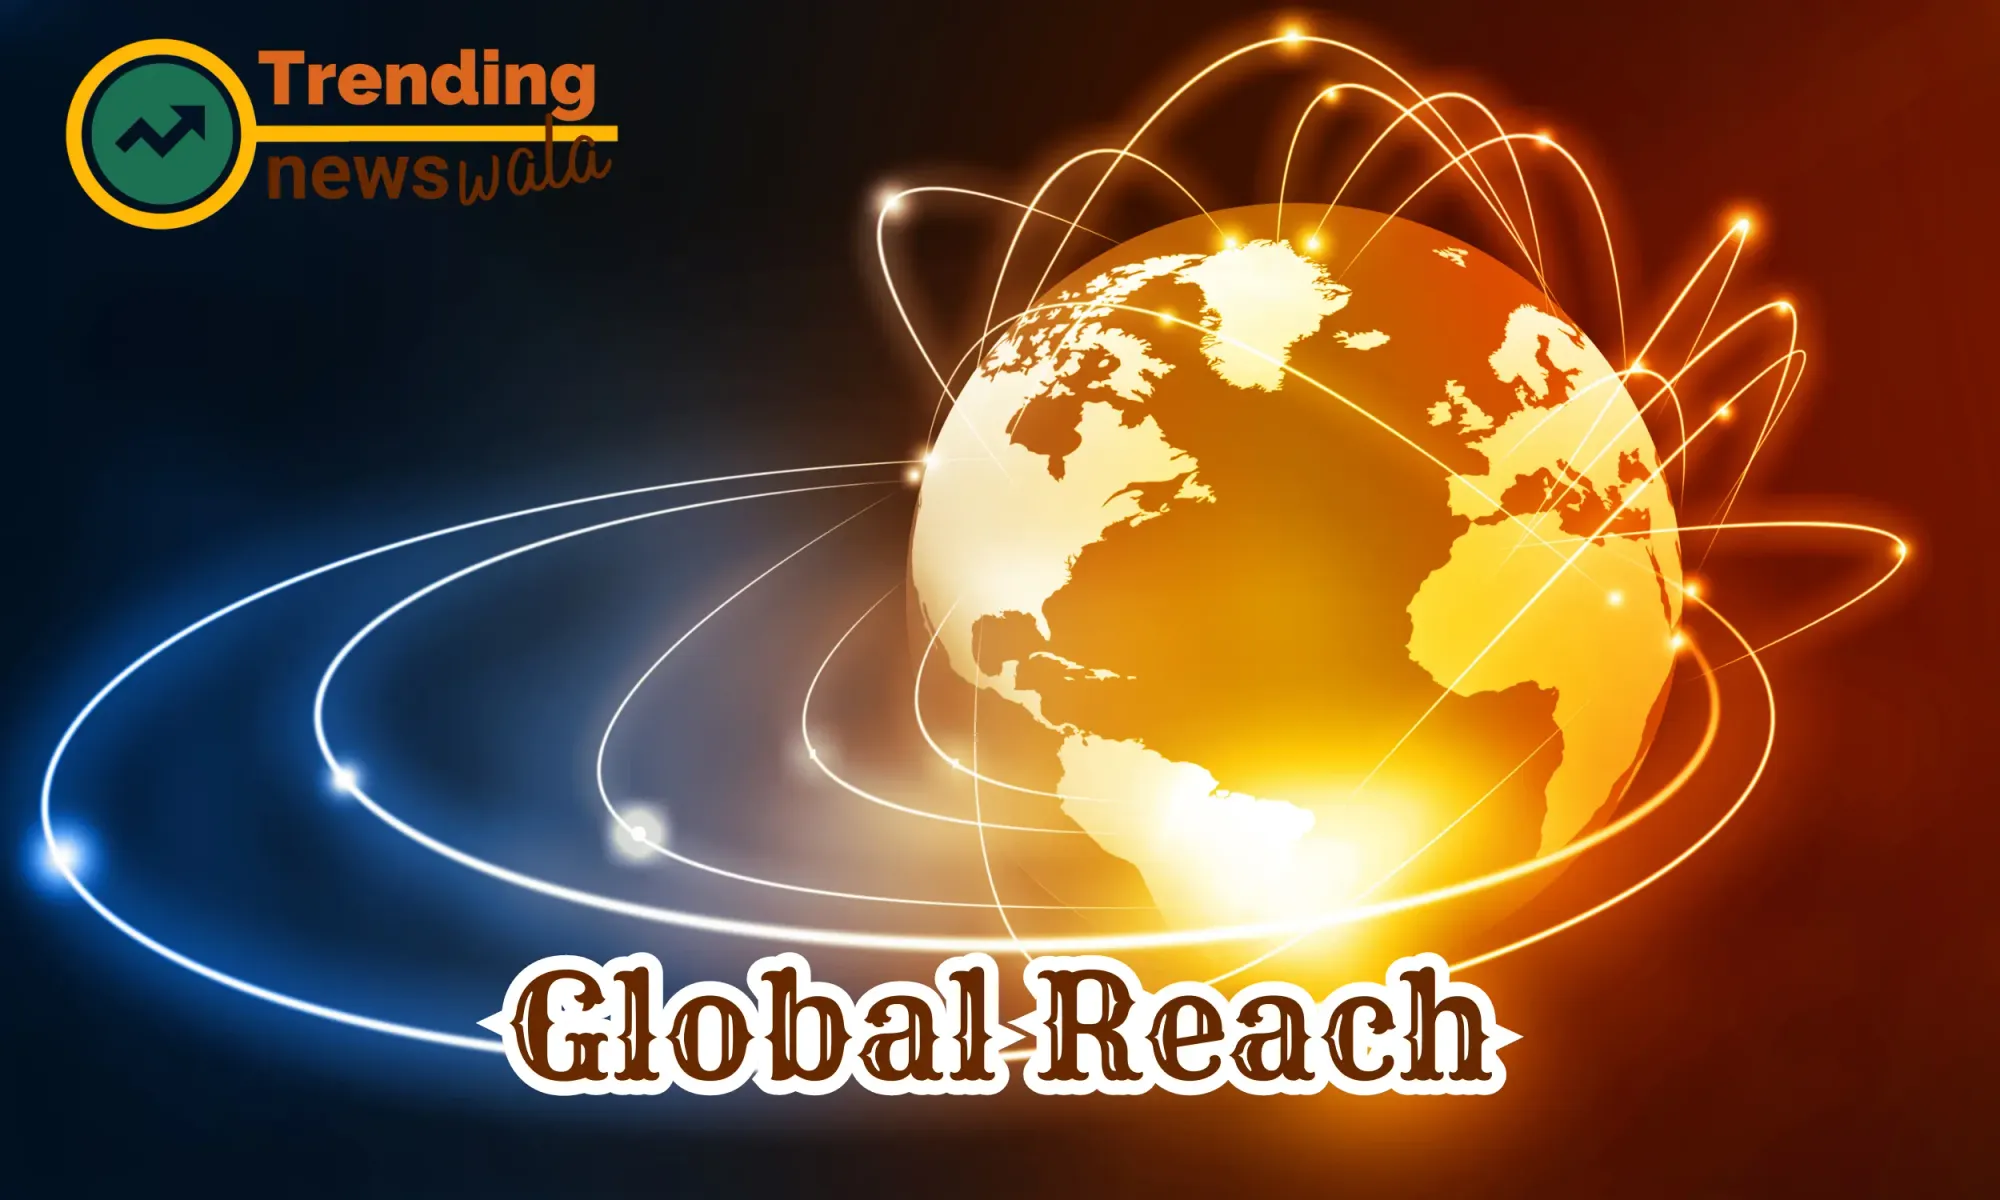 Global reach in the context of business and marketing refers